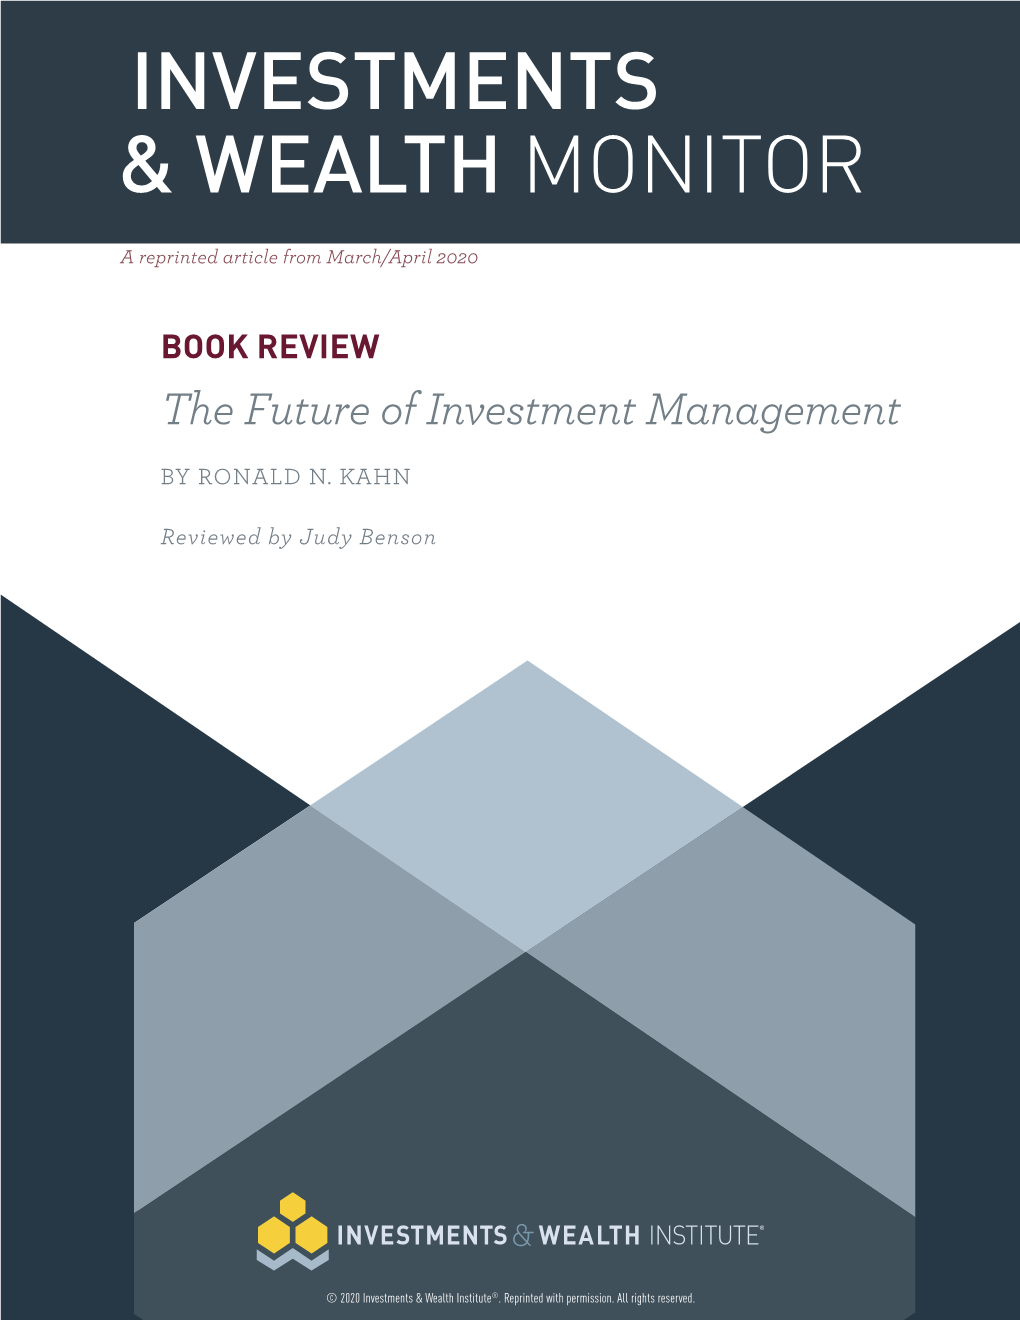 The Future of Investment Management